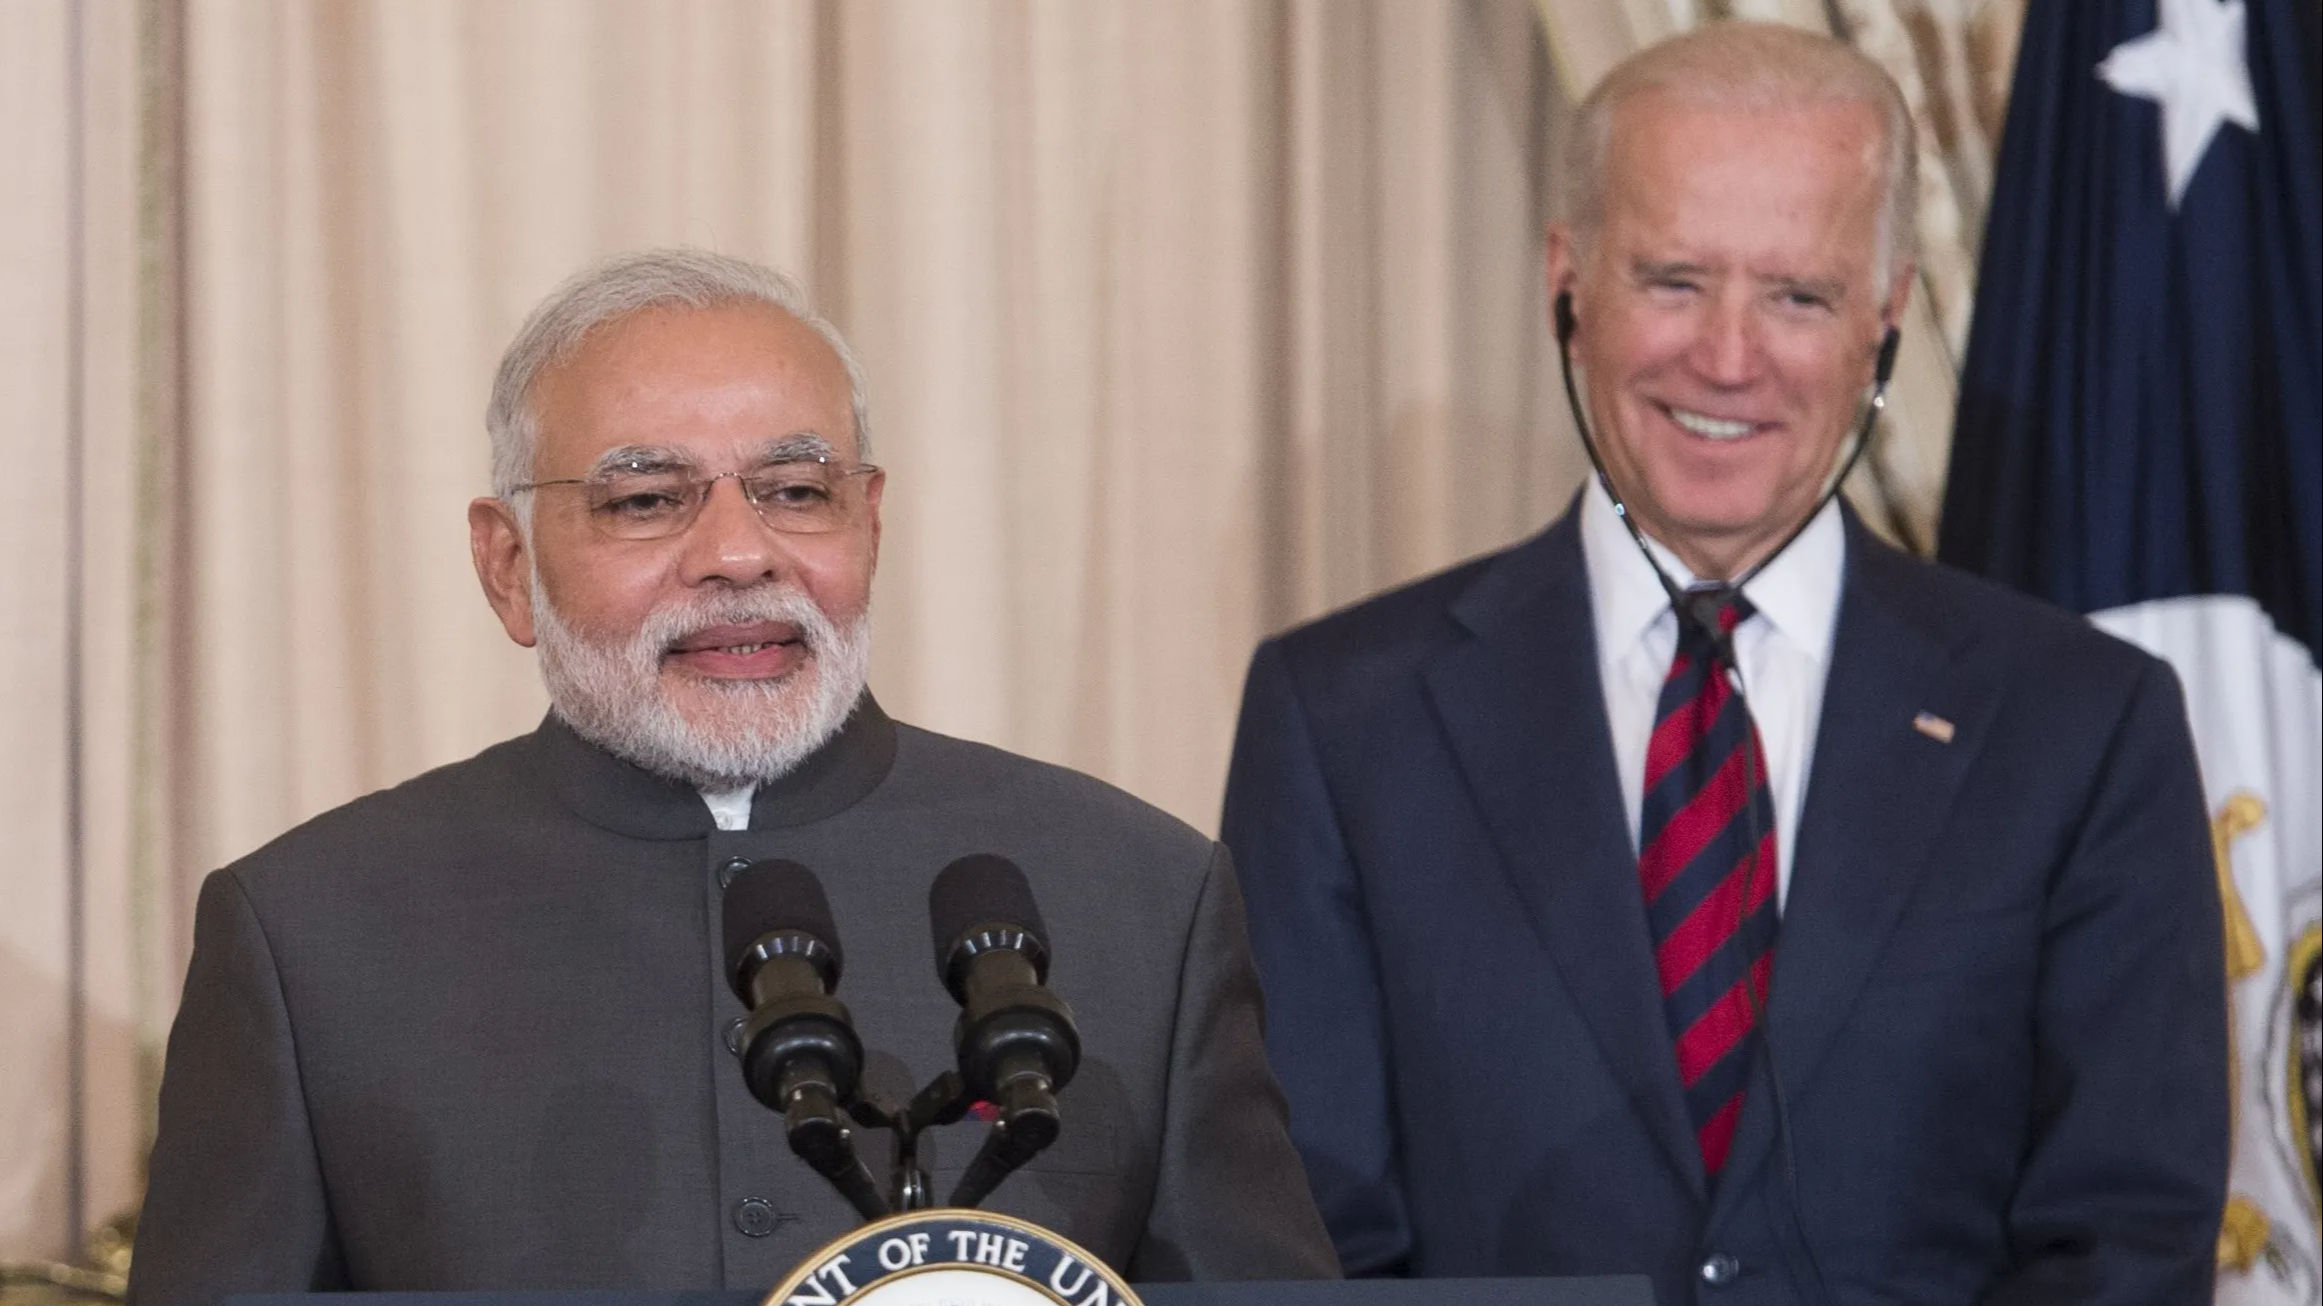 Call-on help: US rushes ‘series of help to India’ day after Modi-Biden chat